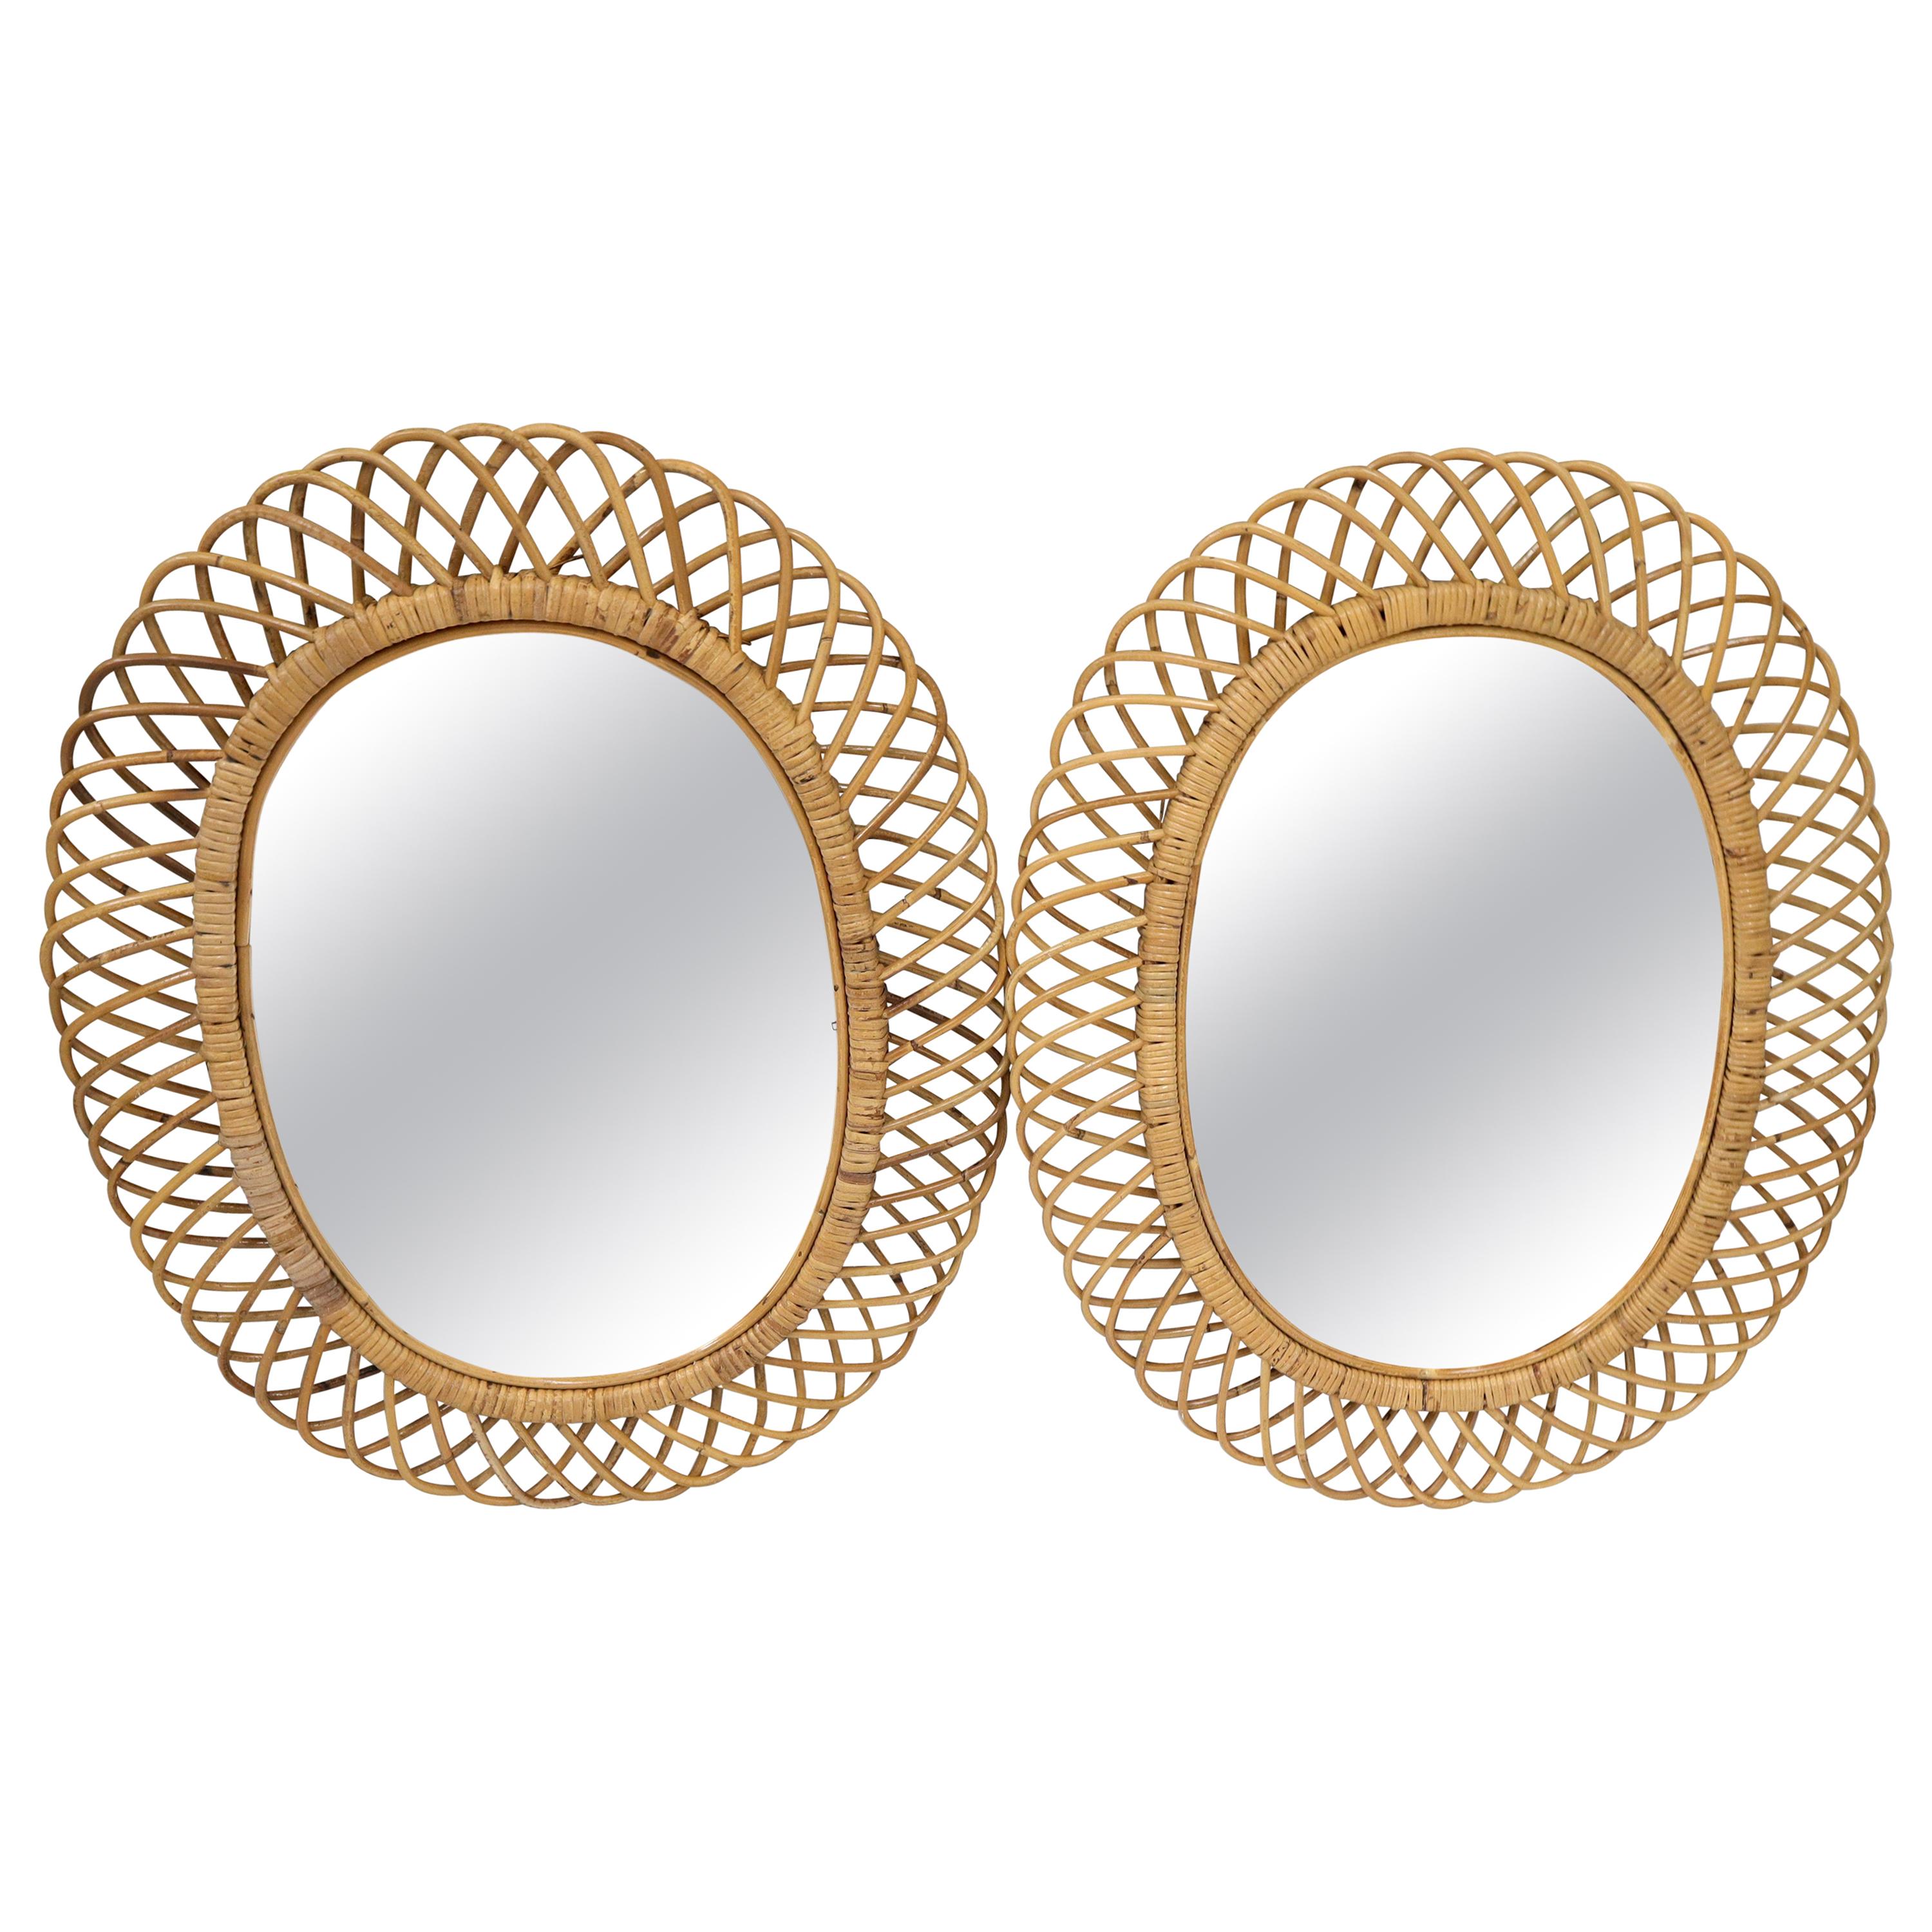 Pair of Decorative Oval Rattan Frames Mirrors